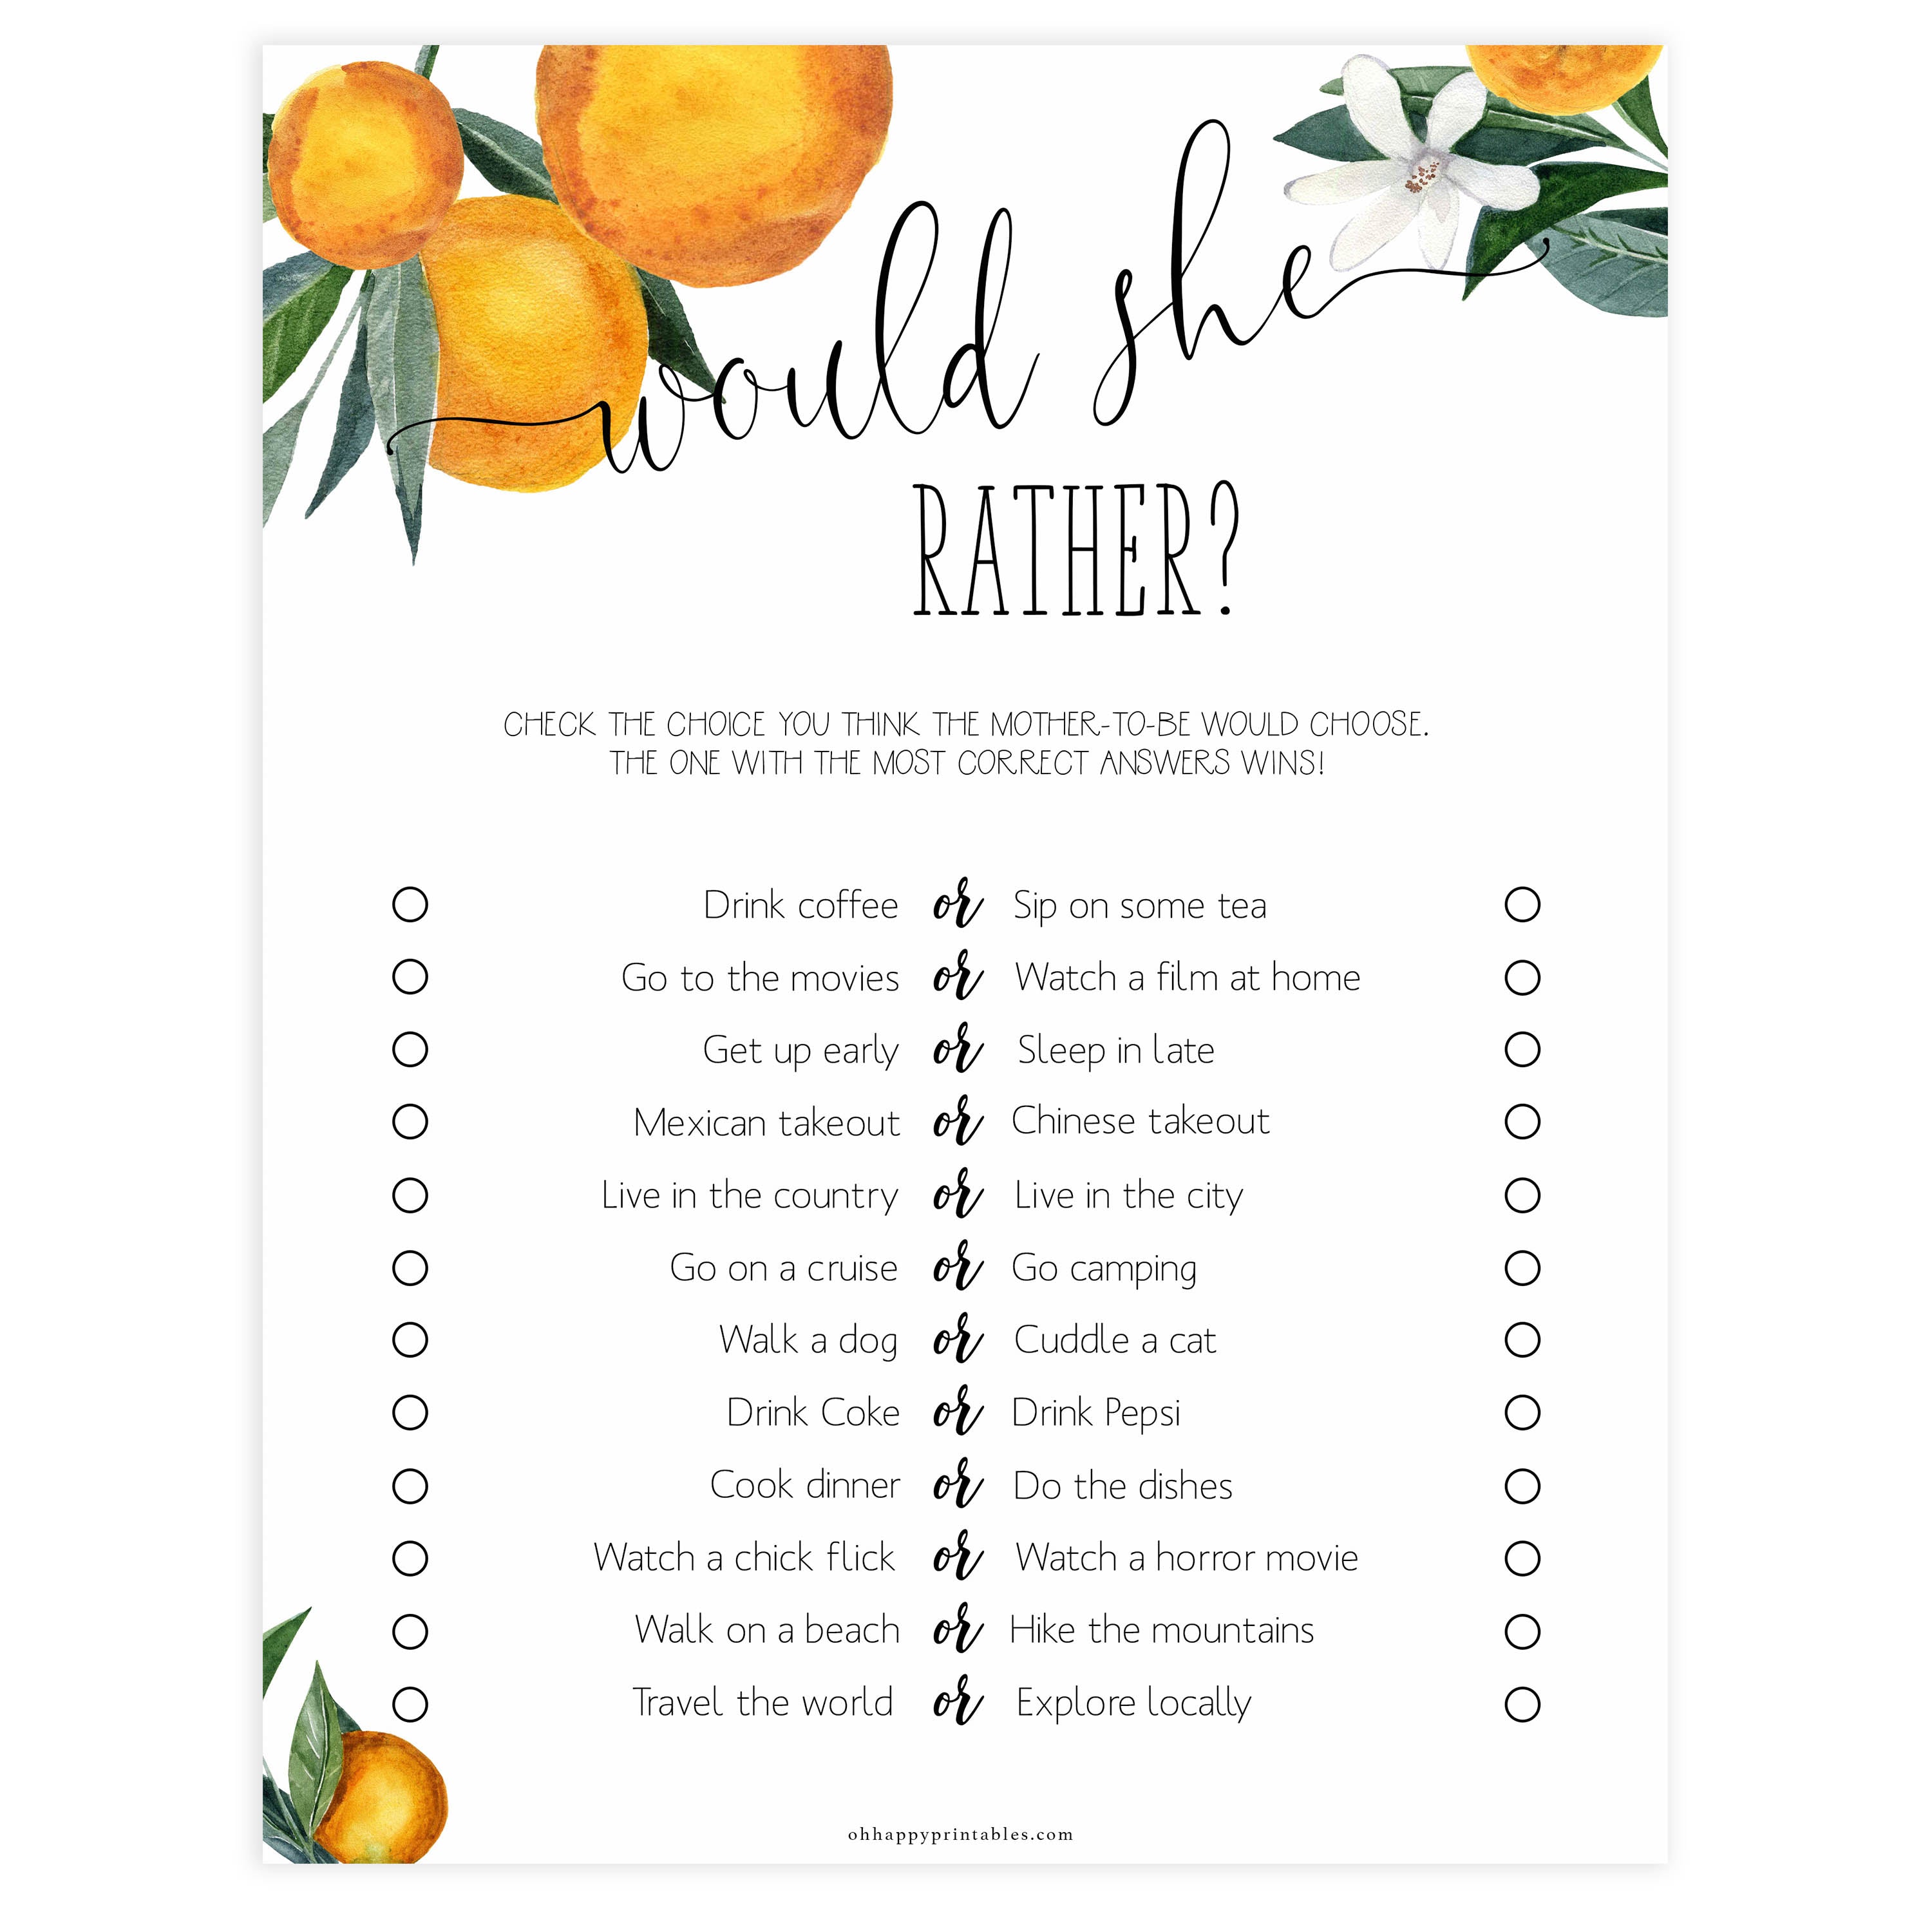 would she rather baby shower game, Printable baby shower games, little cutie baby games, baby shower games, fun baby shower ideas, top baby shower ideas, little cutie baby shower, baby shower games, fun little cutie baby shower ideas, citrus baby shower games, citrus baby shower, orange baby shower